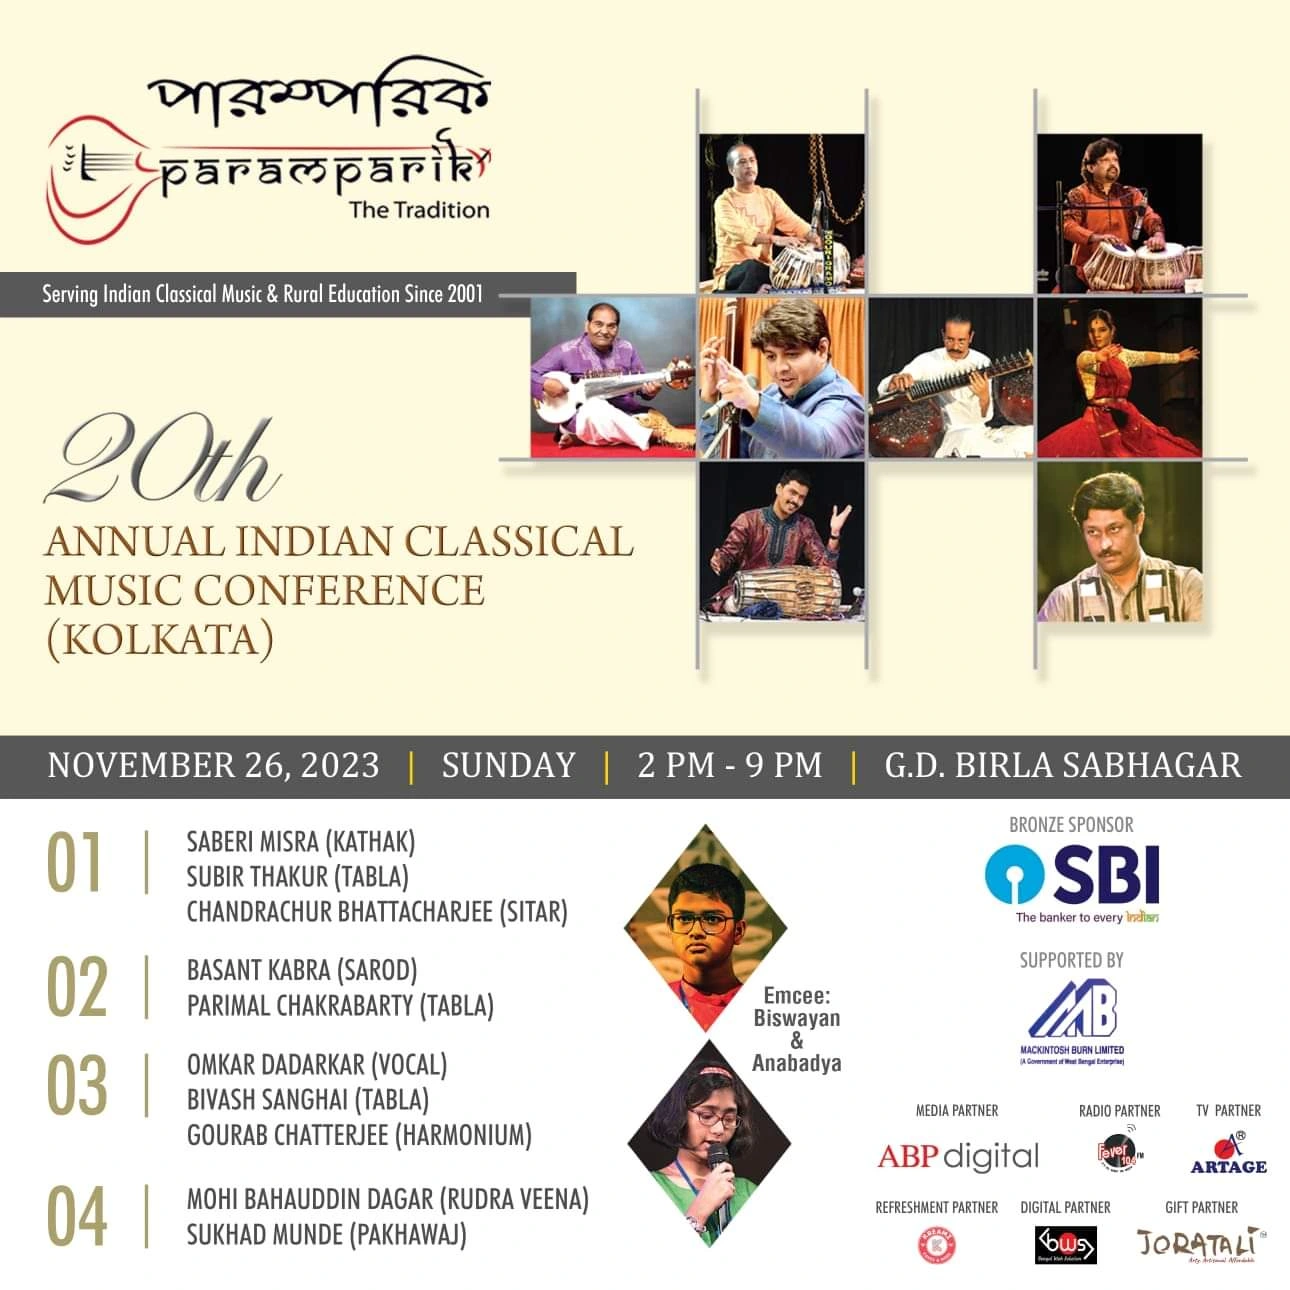 Paramparik - 20th Annual Indian Classical Conference